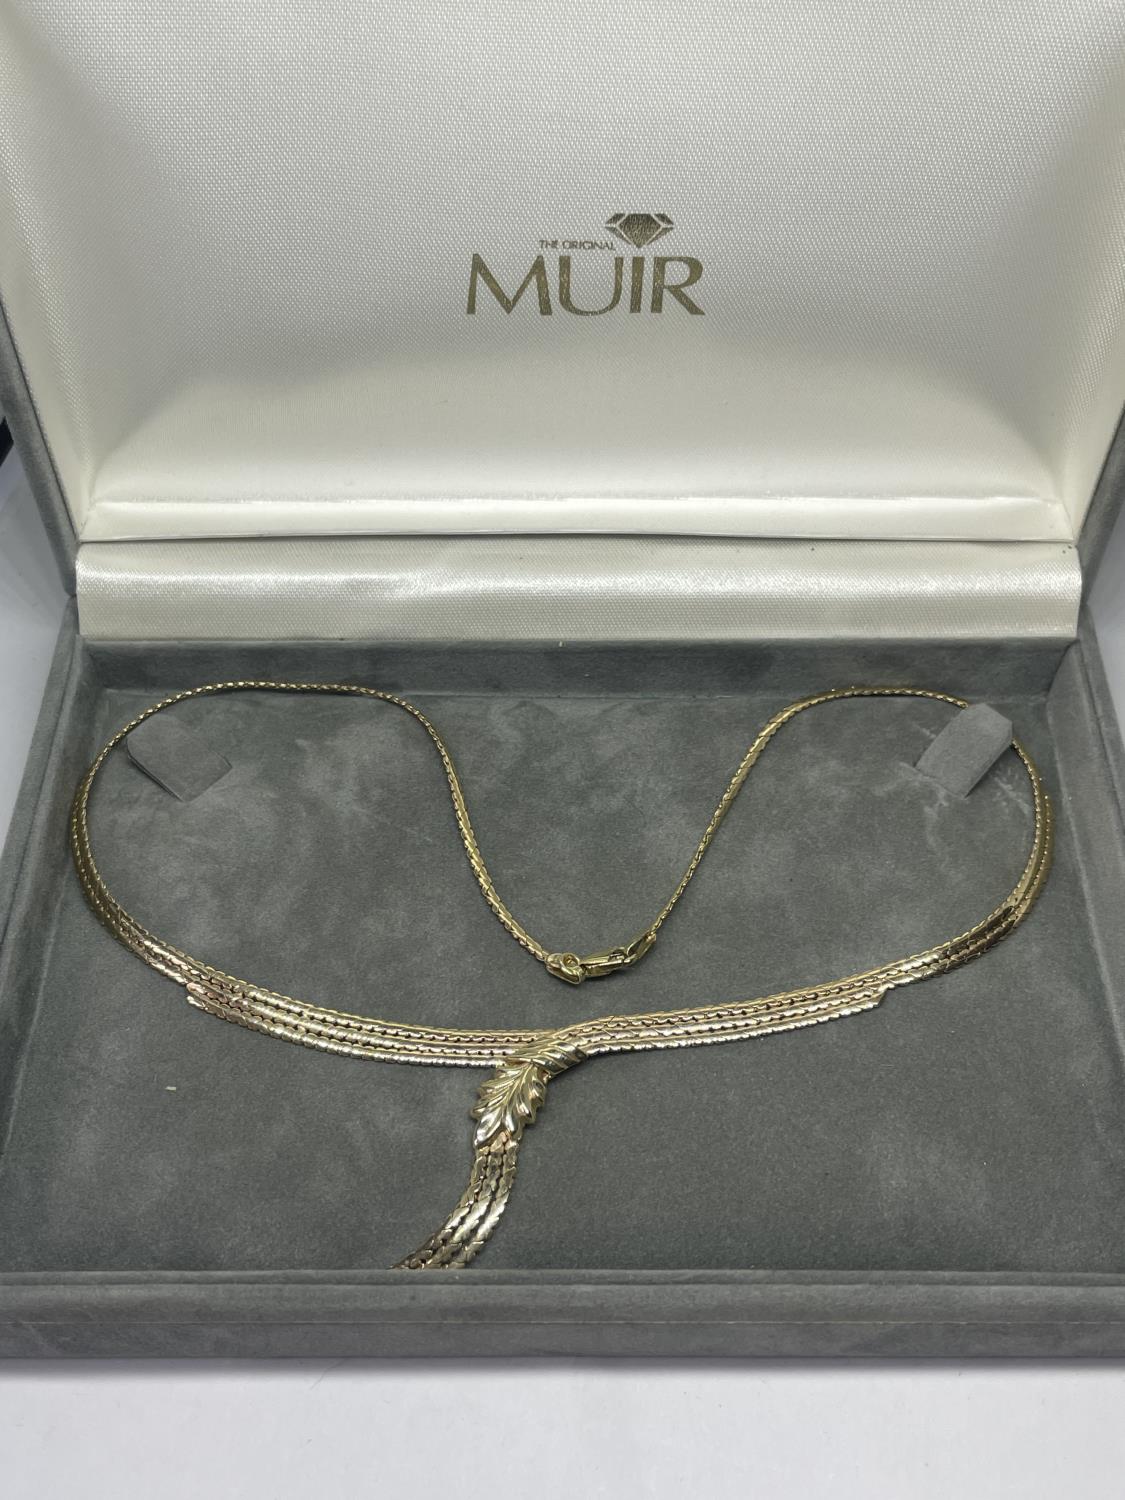 A 9 CARAT GOLD NECKLACE IN A PRESENTATION BOX